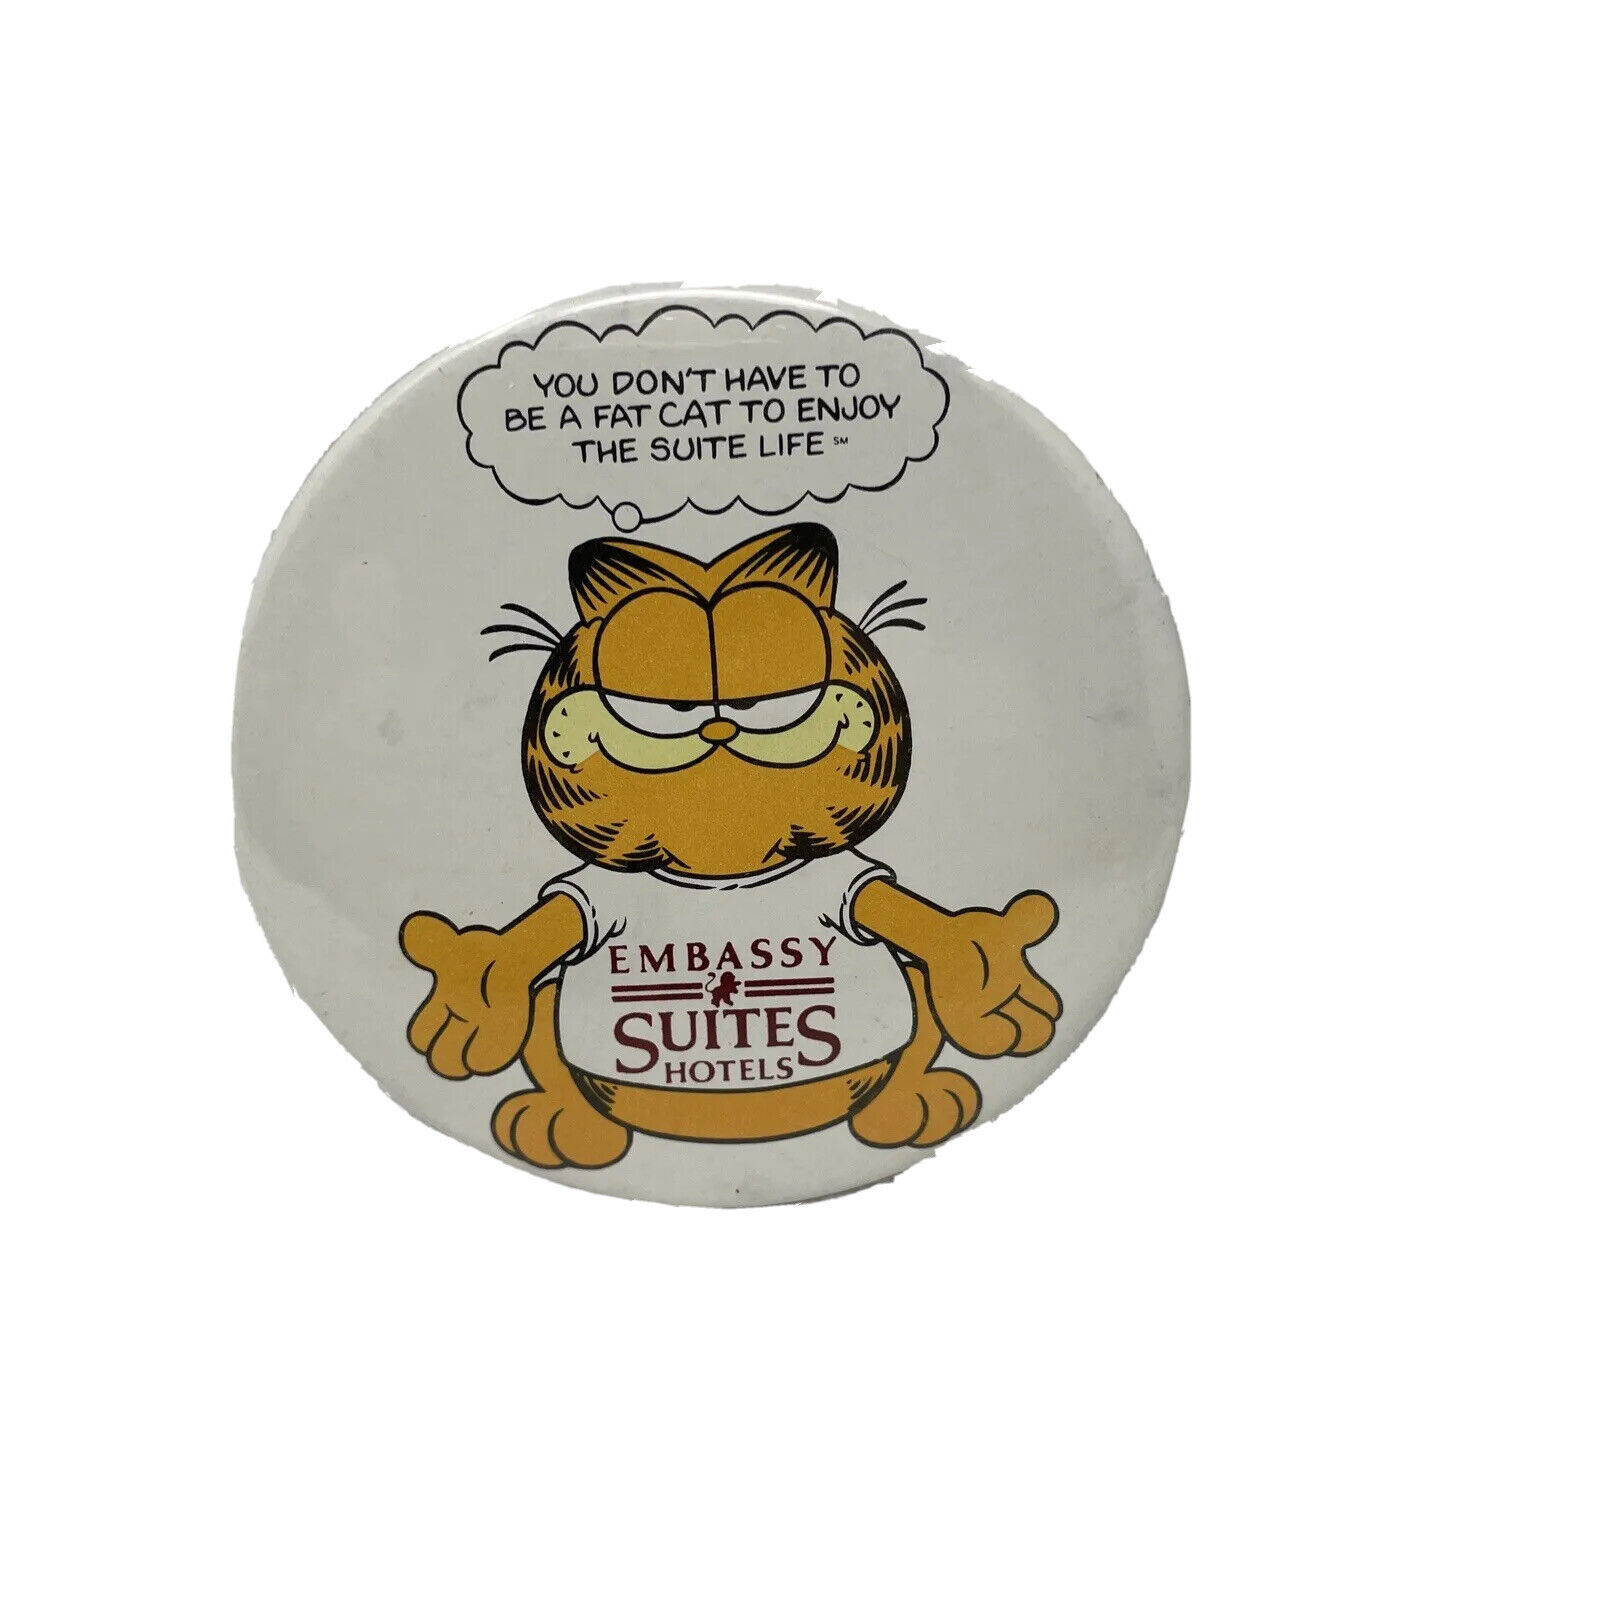 Vtg Garfield You Don’t Have To Be A Fat Cat Cat Cartoon Pin Button Embassy Suite